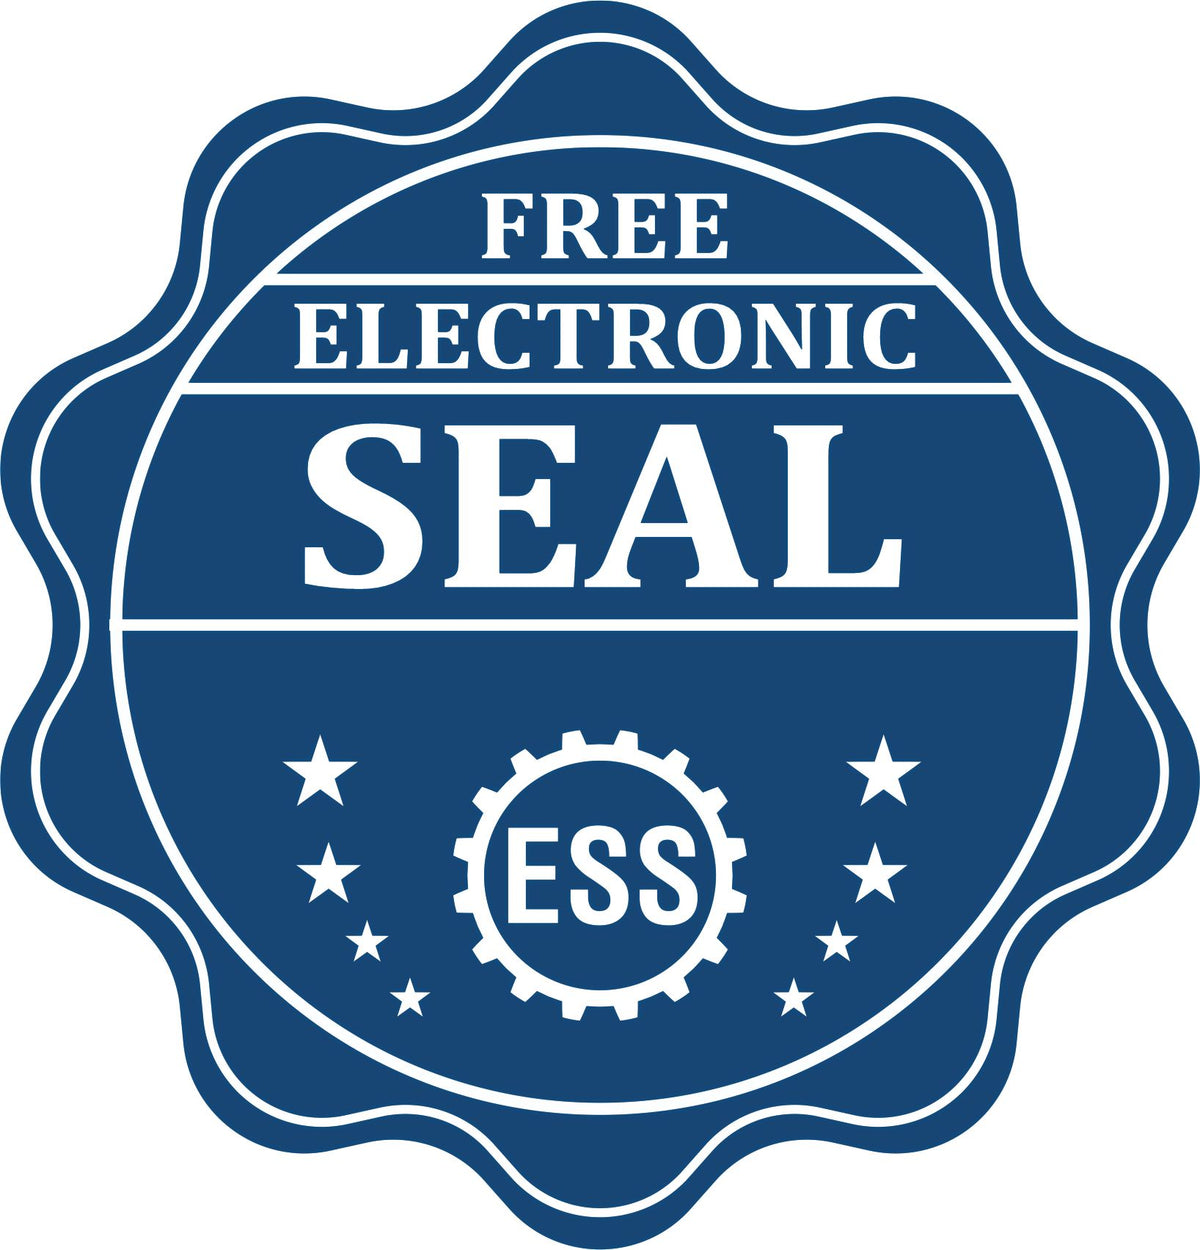 A badge showing a free electronic seal for the PSI Delaware Notary Stamp with stars and the ESS gear on the emblem.